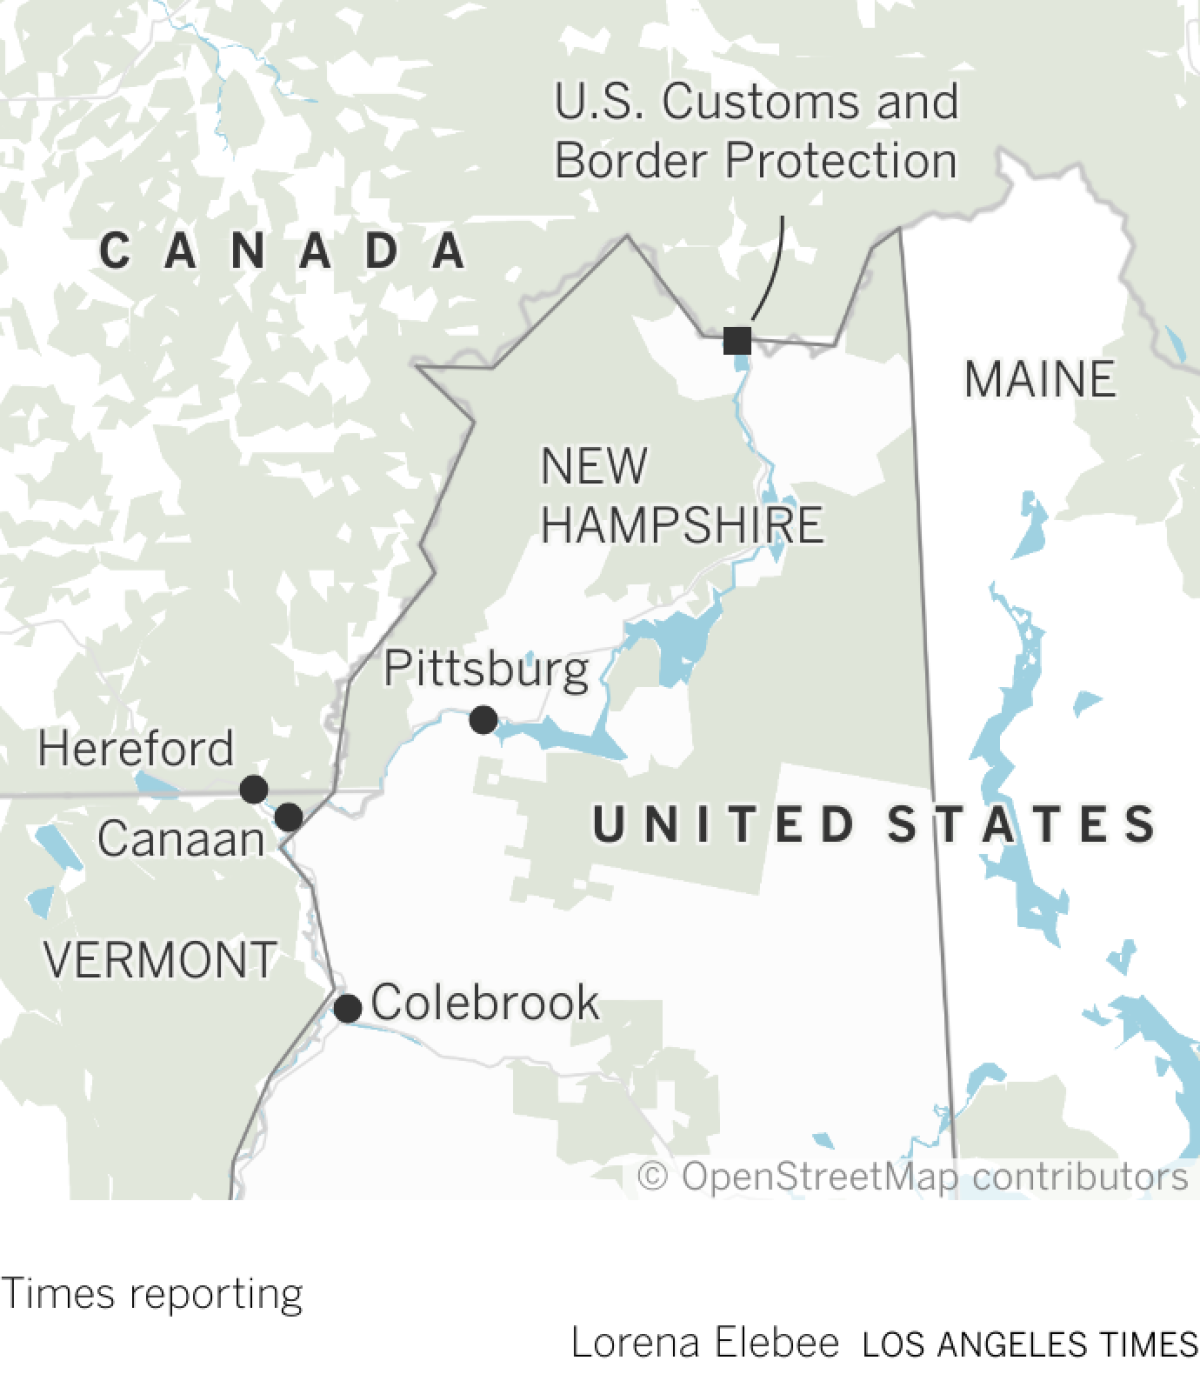 Map shows the New Hampshire and Canada border and nearby sites of U.S. Customs and Border Protection, Pittsburg and Colebrook.